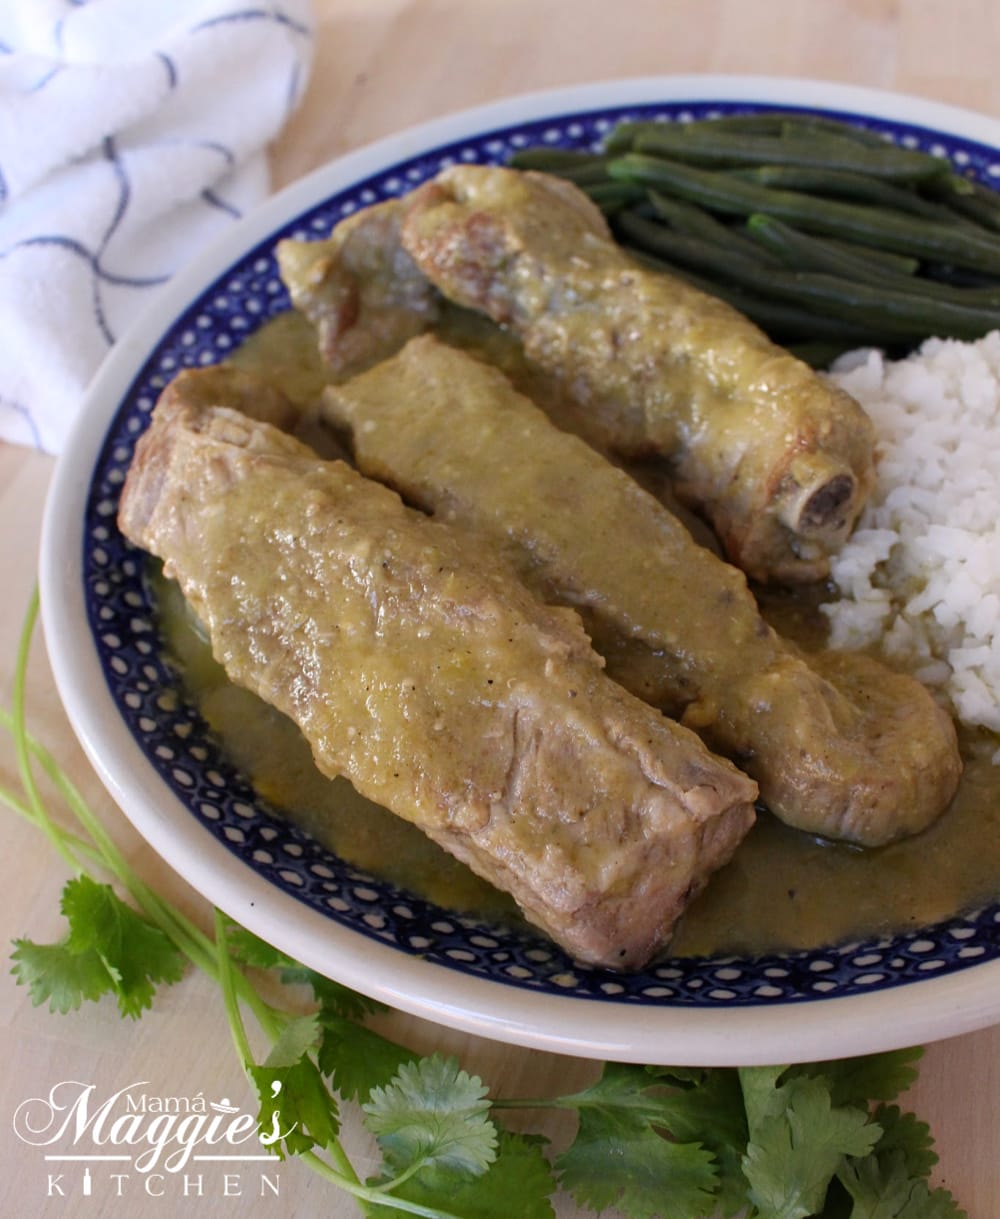 Costillas en Salsa Verde, or Ribs in Mexican Green Salsa, served on a blue plate with rice and green beans.